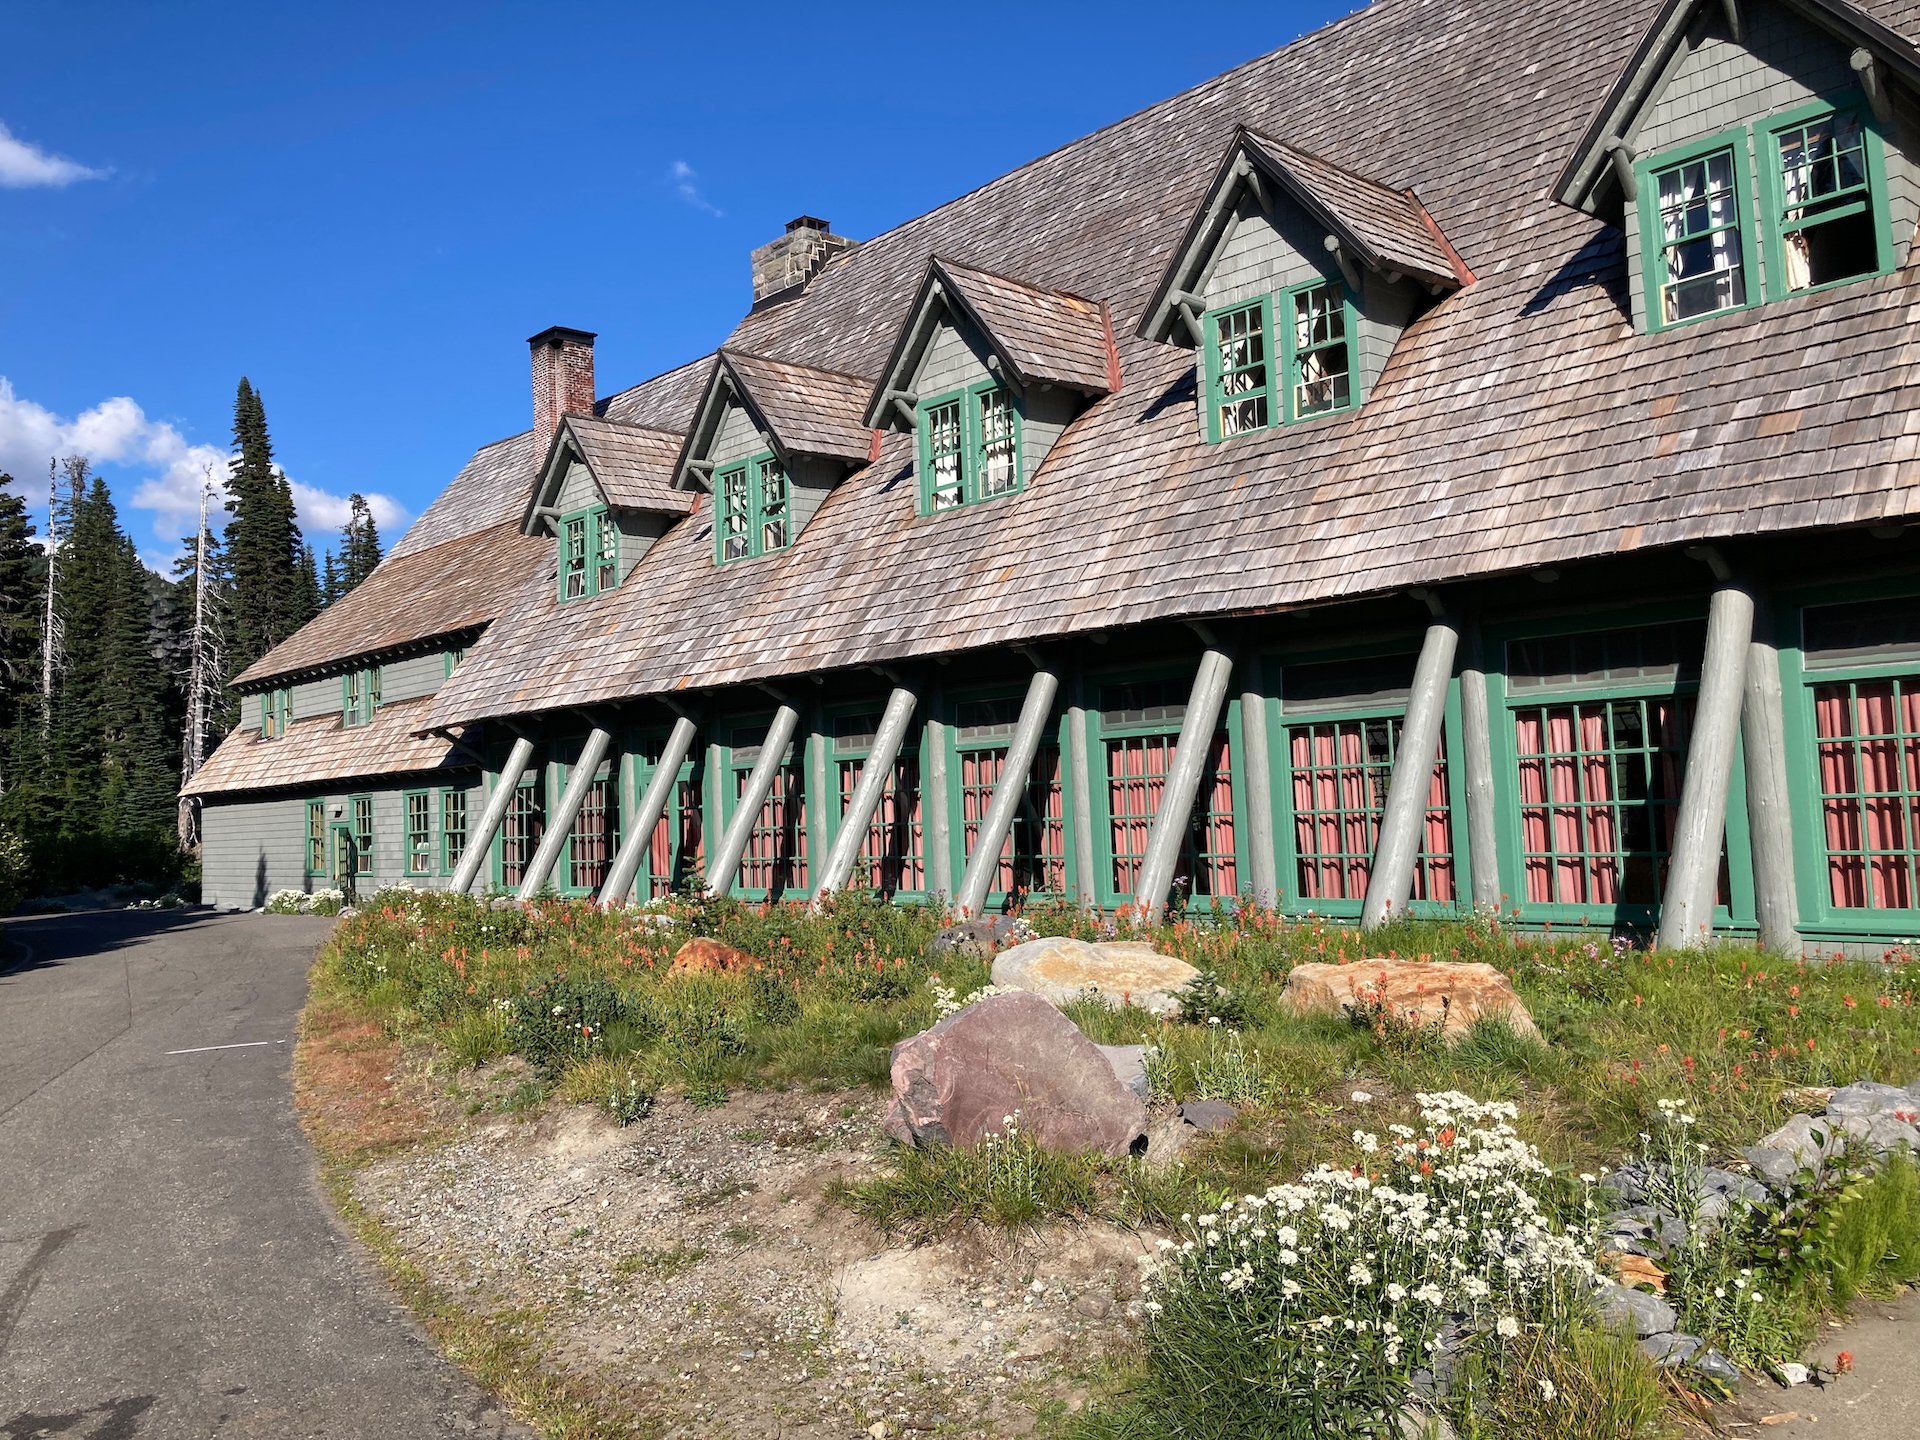  The National Park Lodge at Paradise. 